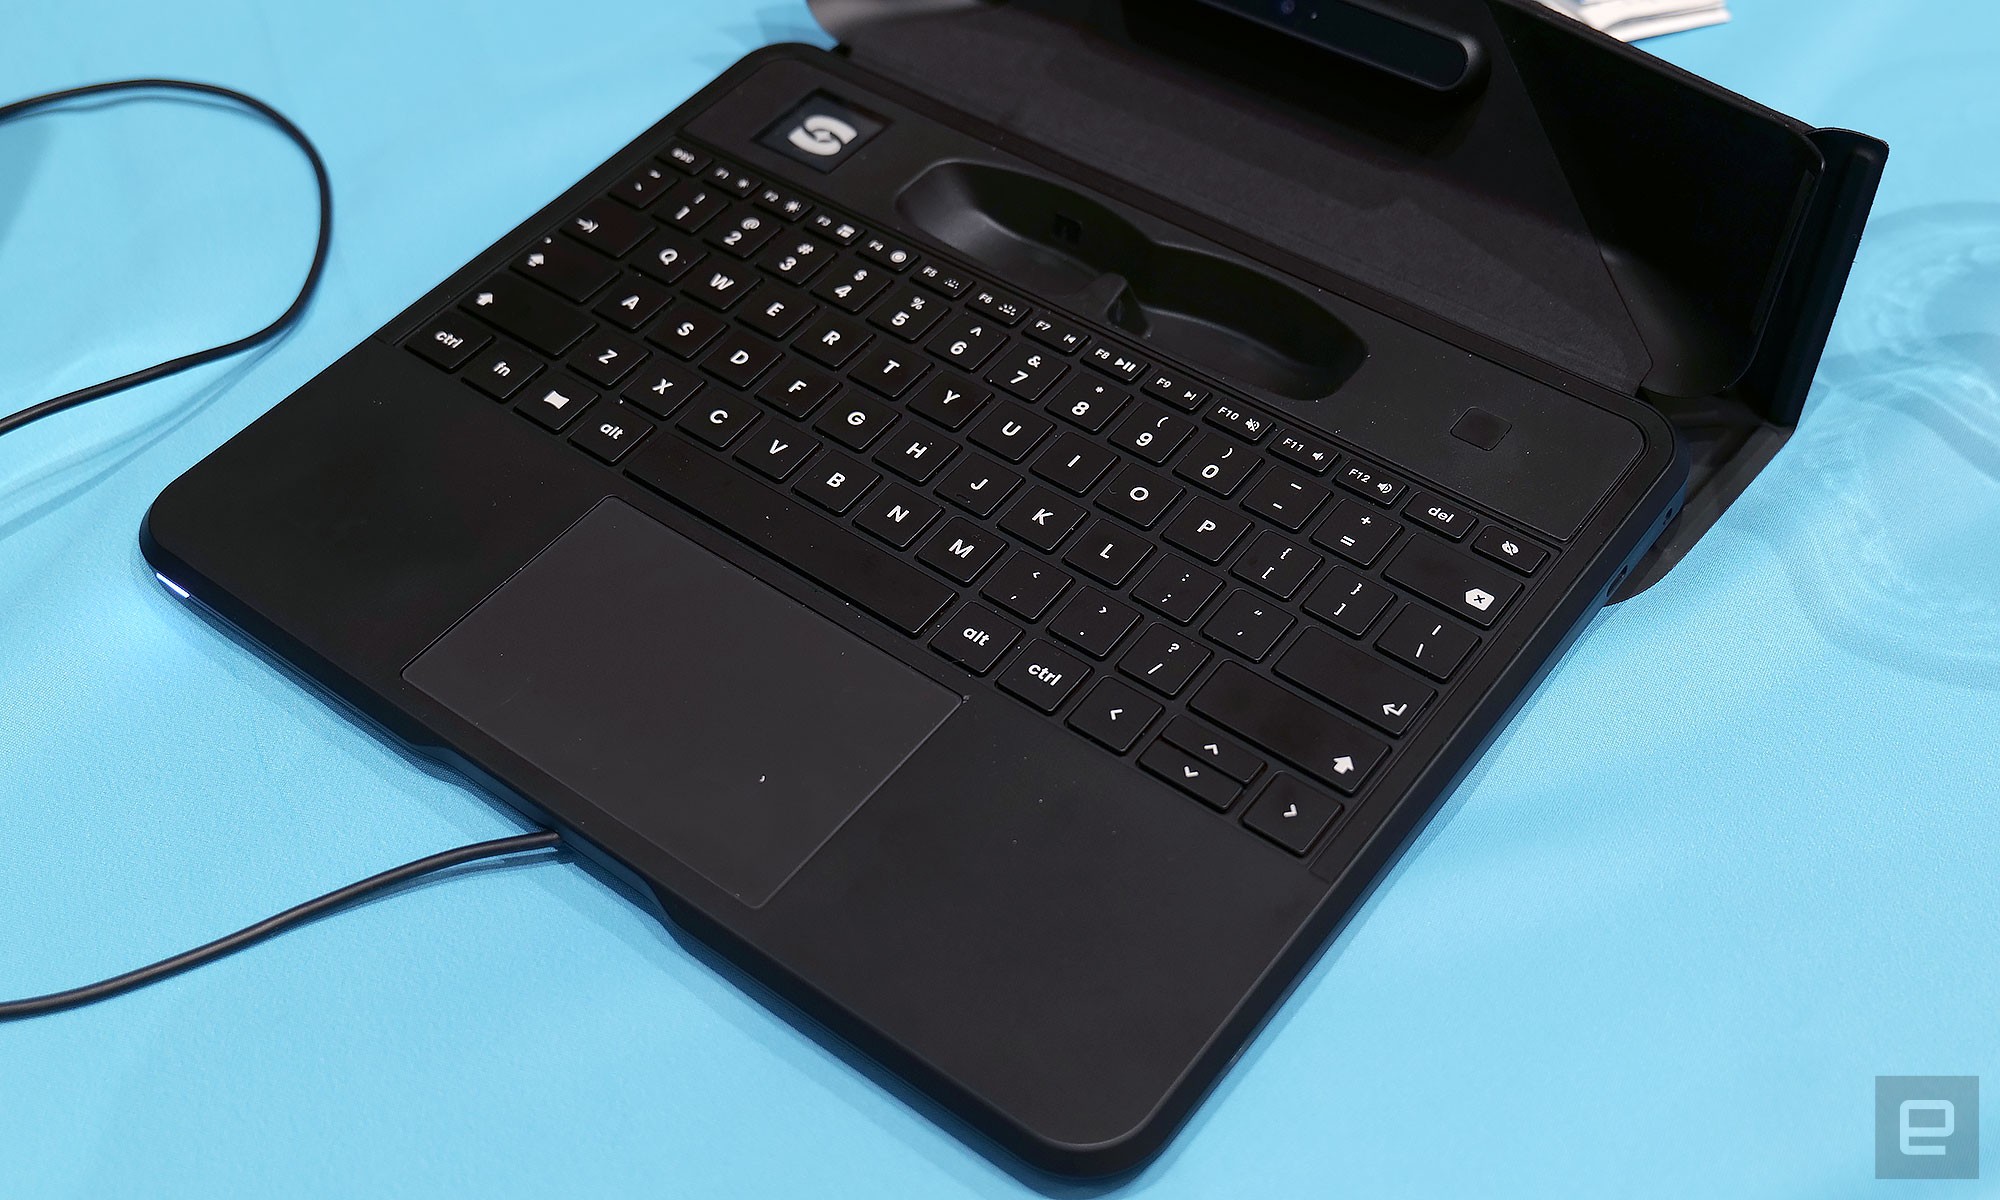 The bottom half of the Spacetop will be immediately familiar, though for a system that costs $2,000, components like the keyboard and touchpad don't feel as premium as similarly priced traditional notebooks. 